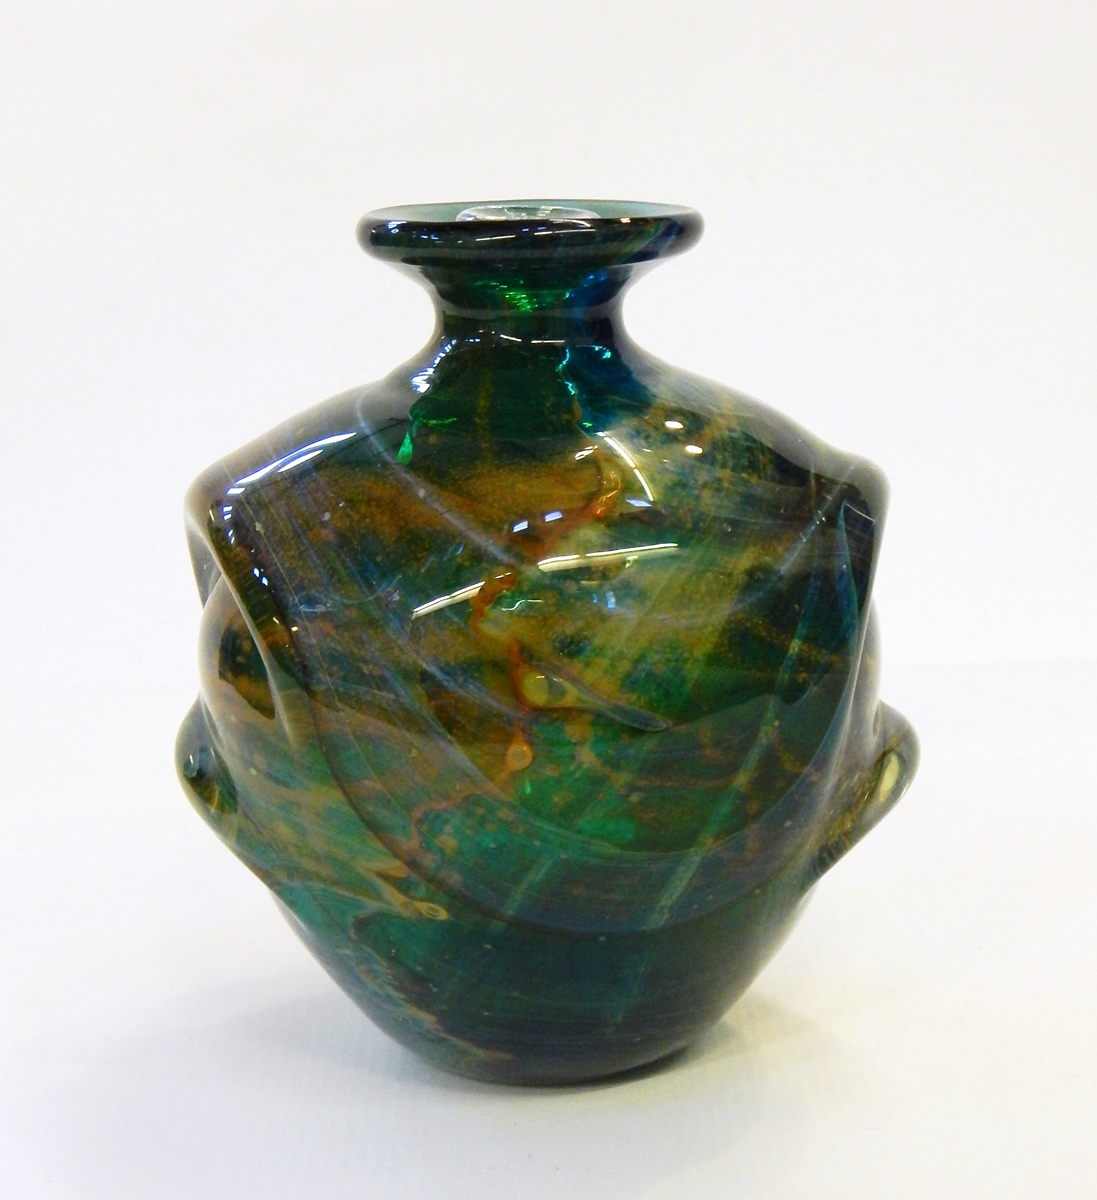 A Mdina glass vase and stopper of swirling designs in brown and yellow, on green ground,